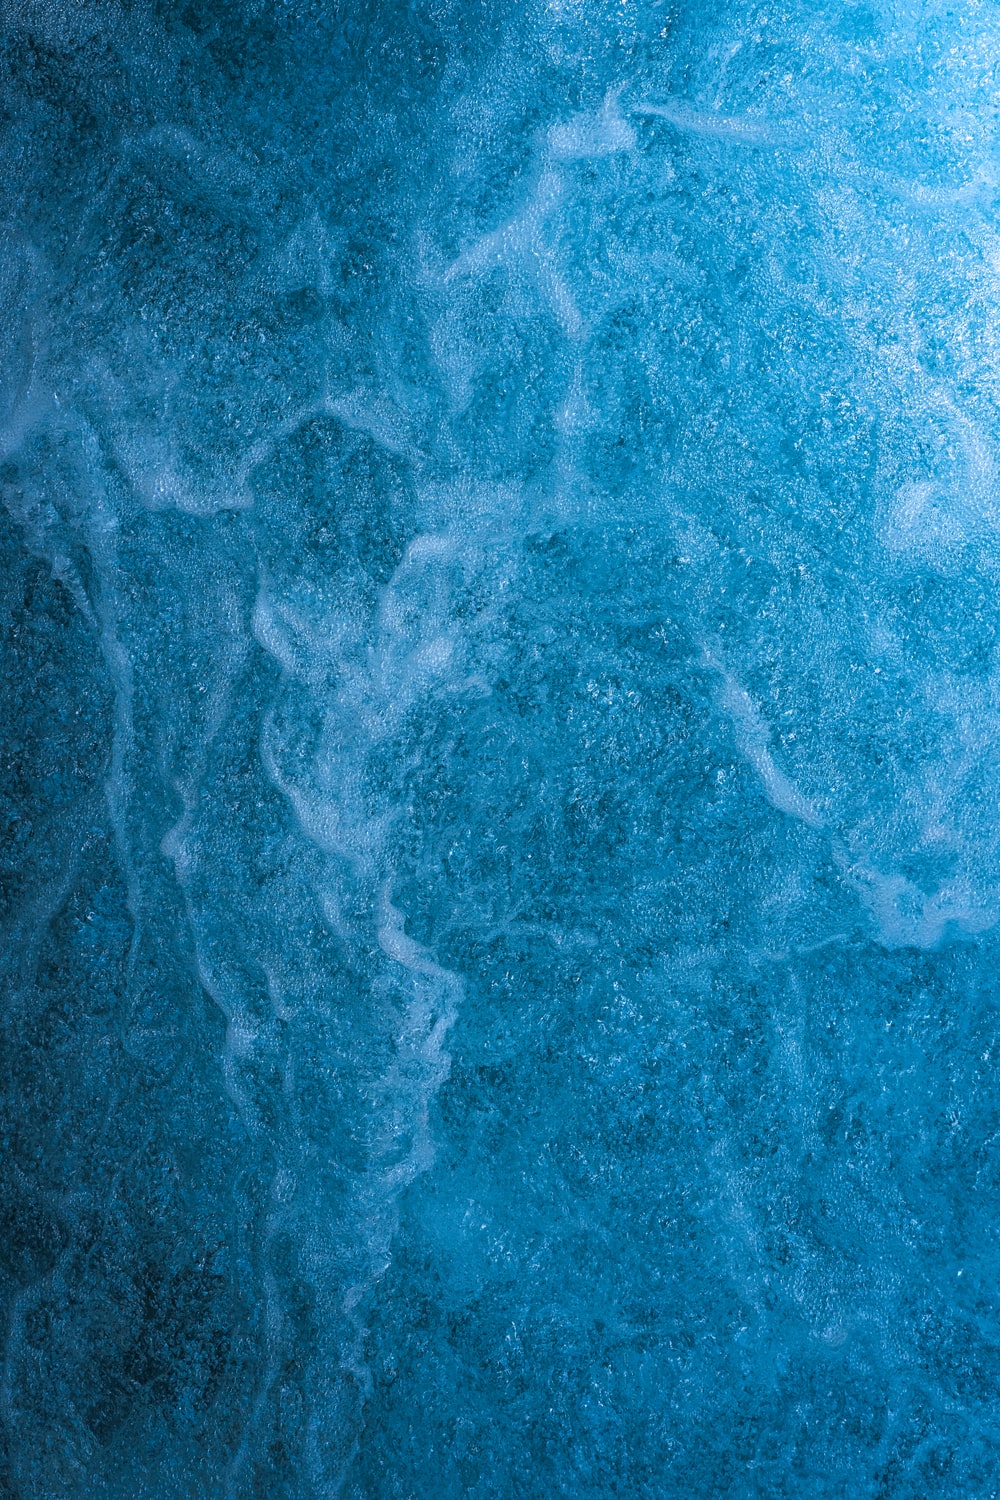 Blue Texture Picture. Download Free Image